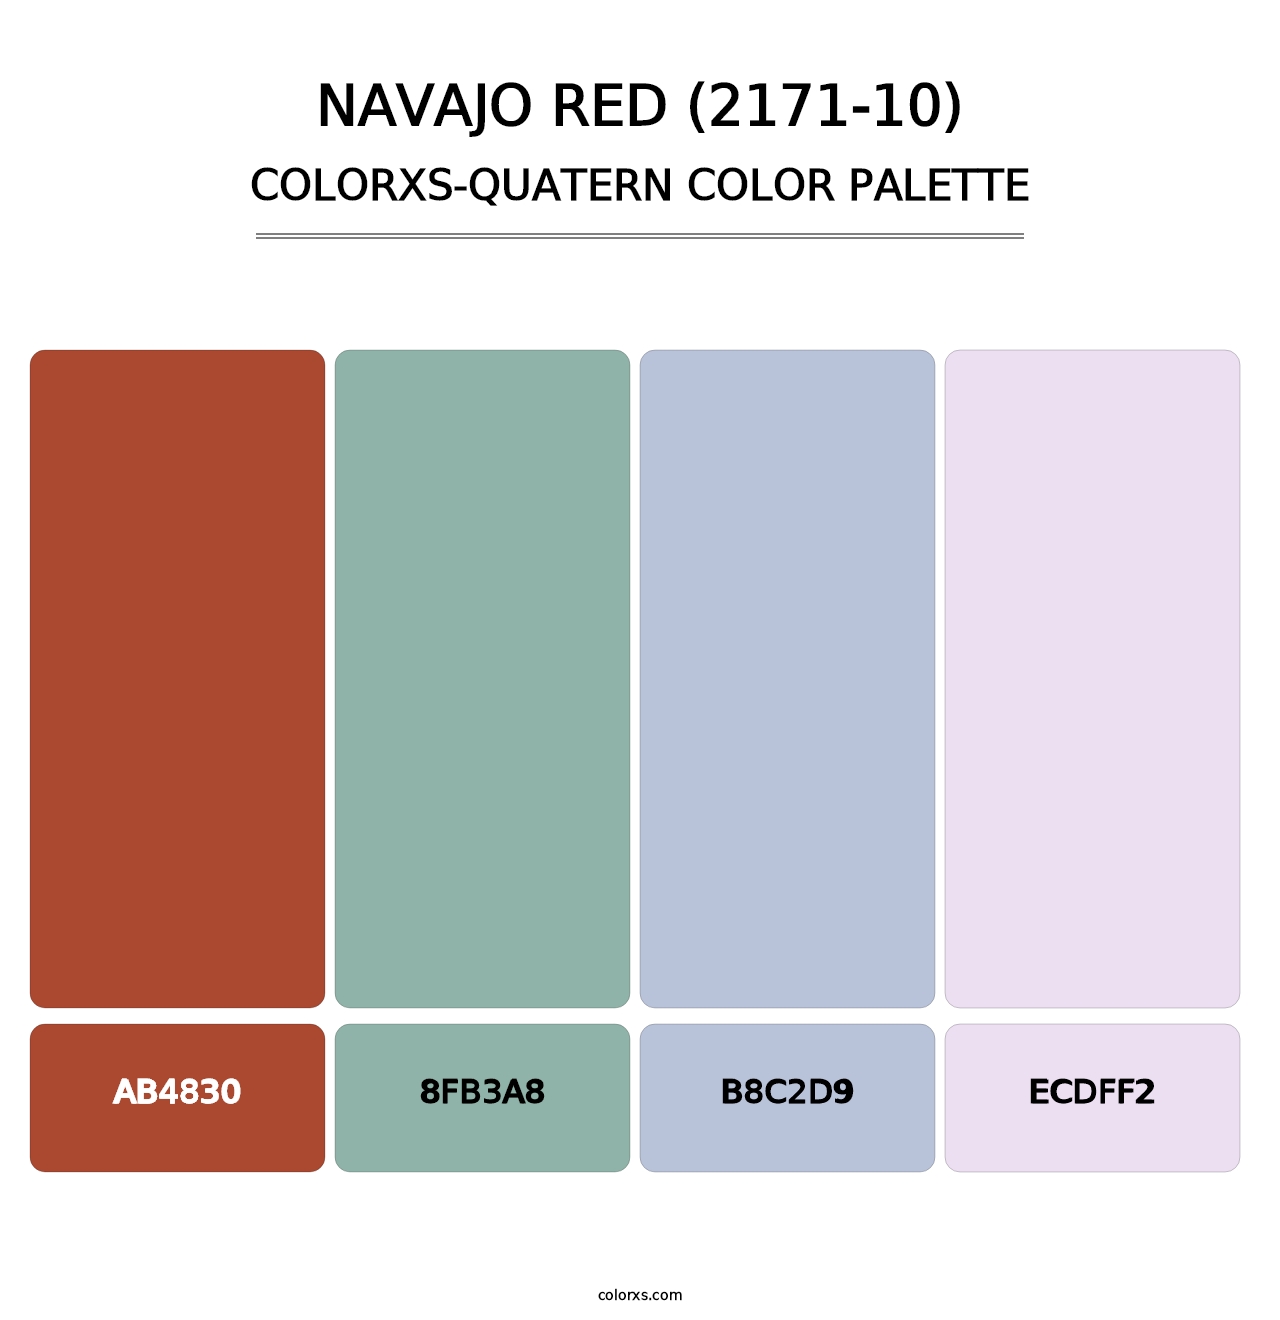 Navajo Red (2171-10) - Colorxs Quatern Palette